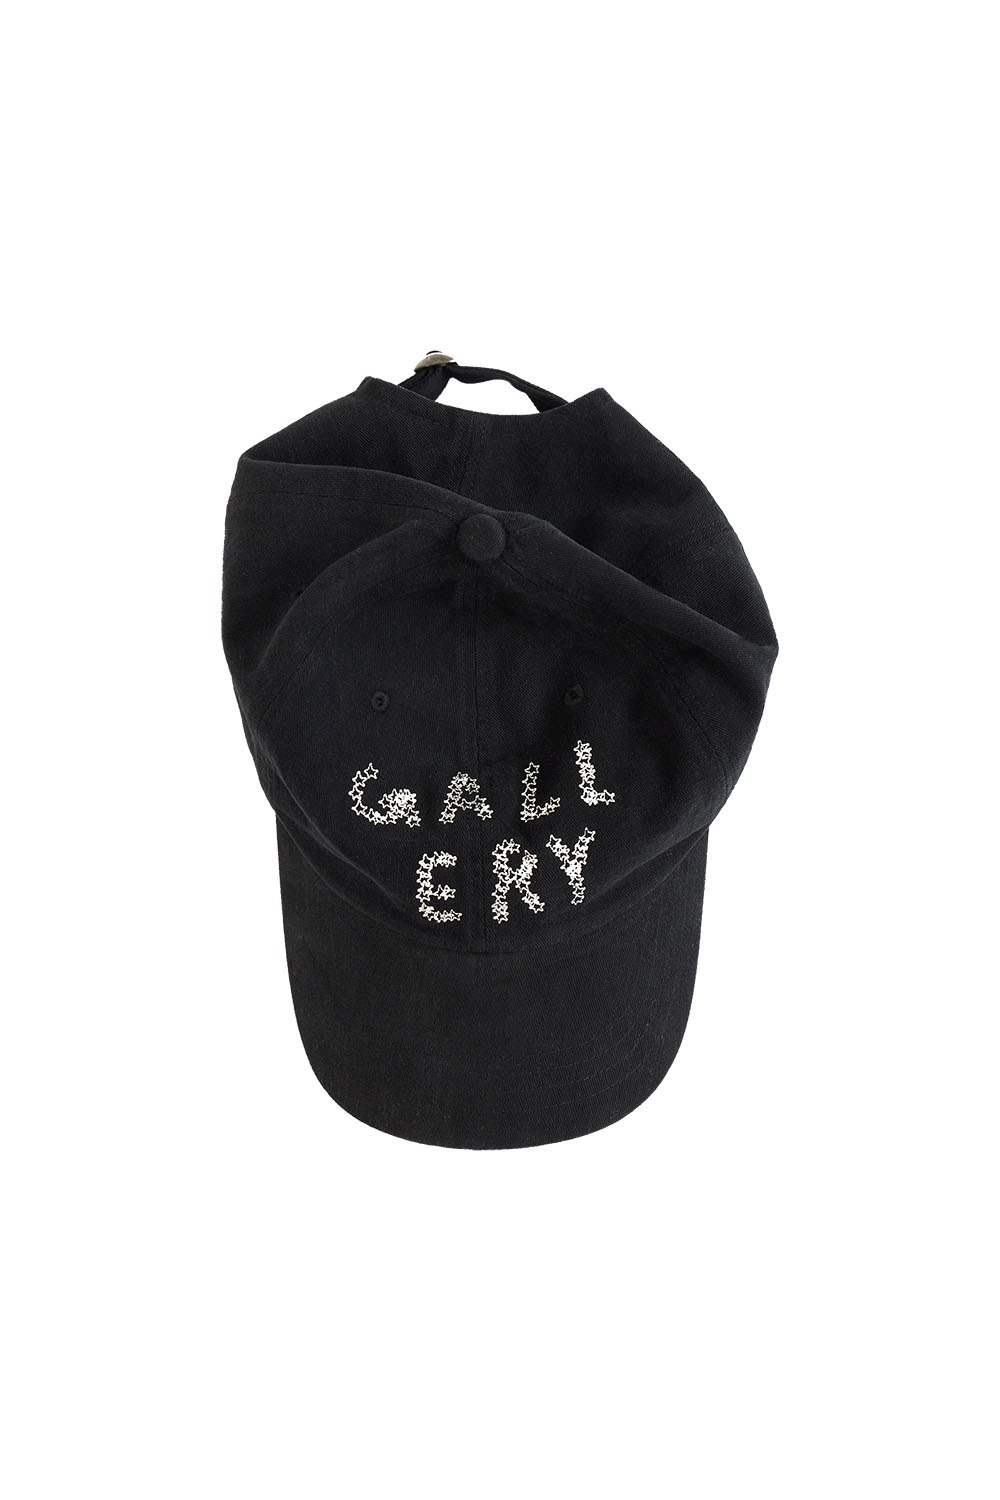 Gallery Embroidered Ball Cap